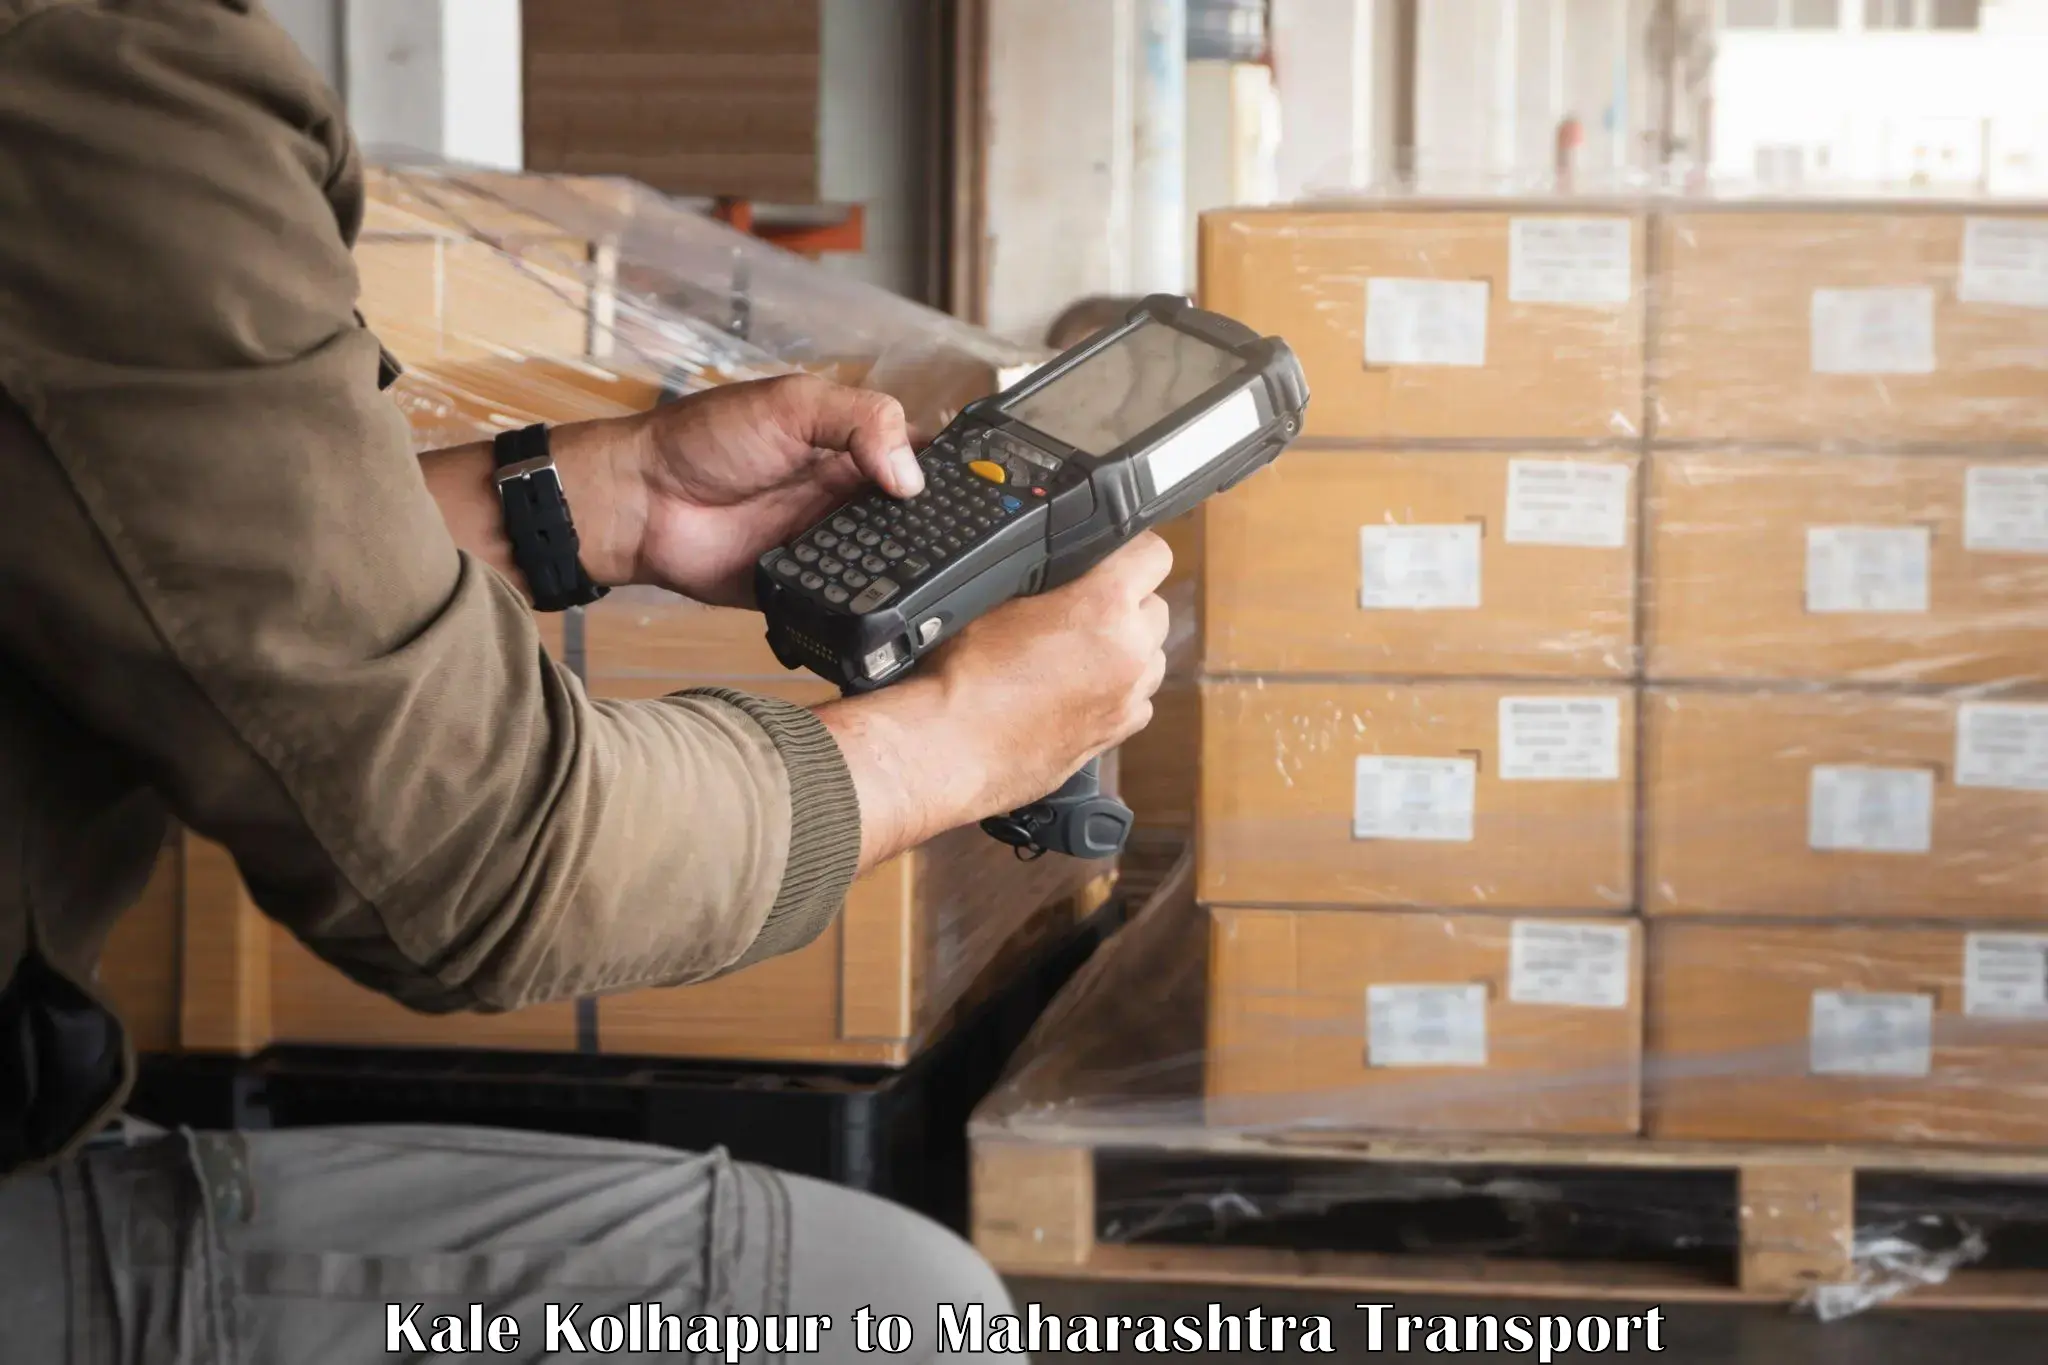 Domestic goods transportation services Kale Kolhapur to Beed